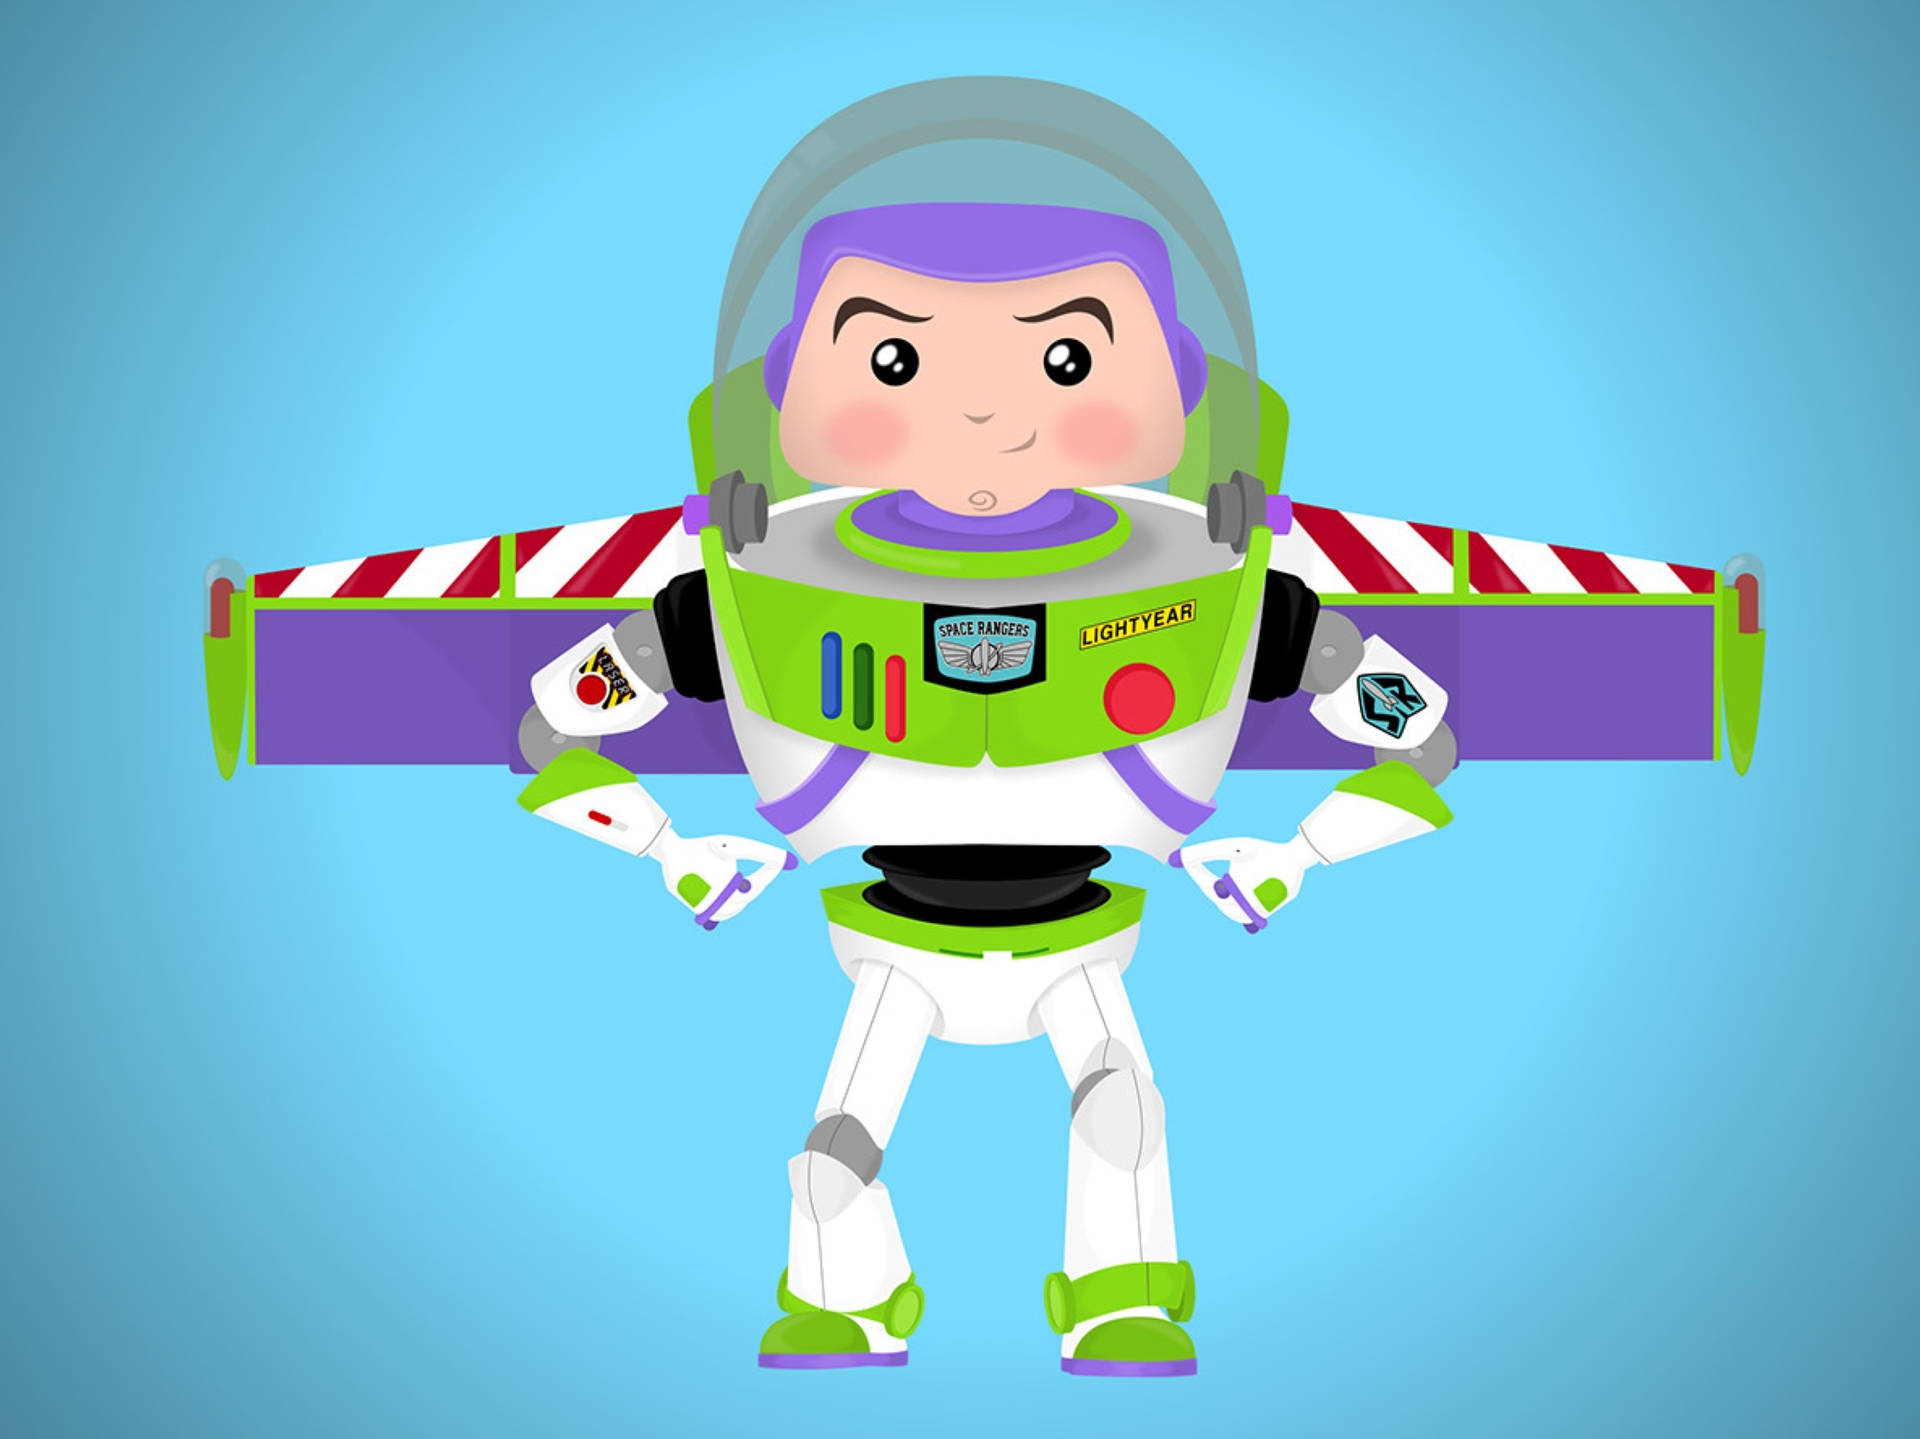 Top 999+ Buzz Lightyear Wallpapers Full HD, 4K✅Free to Use